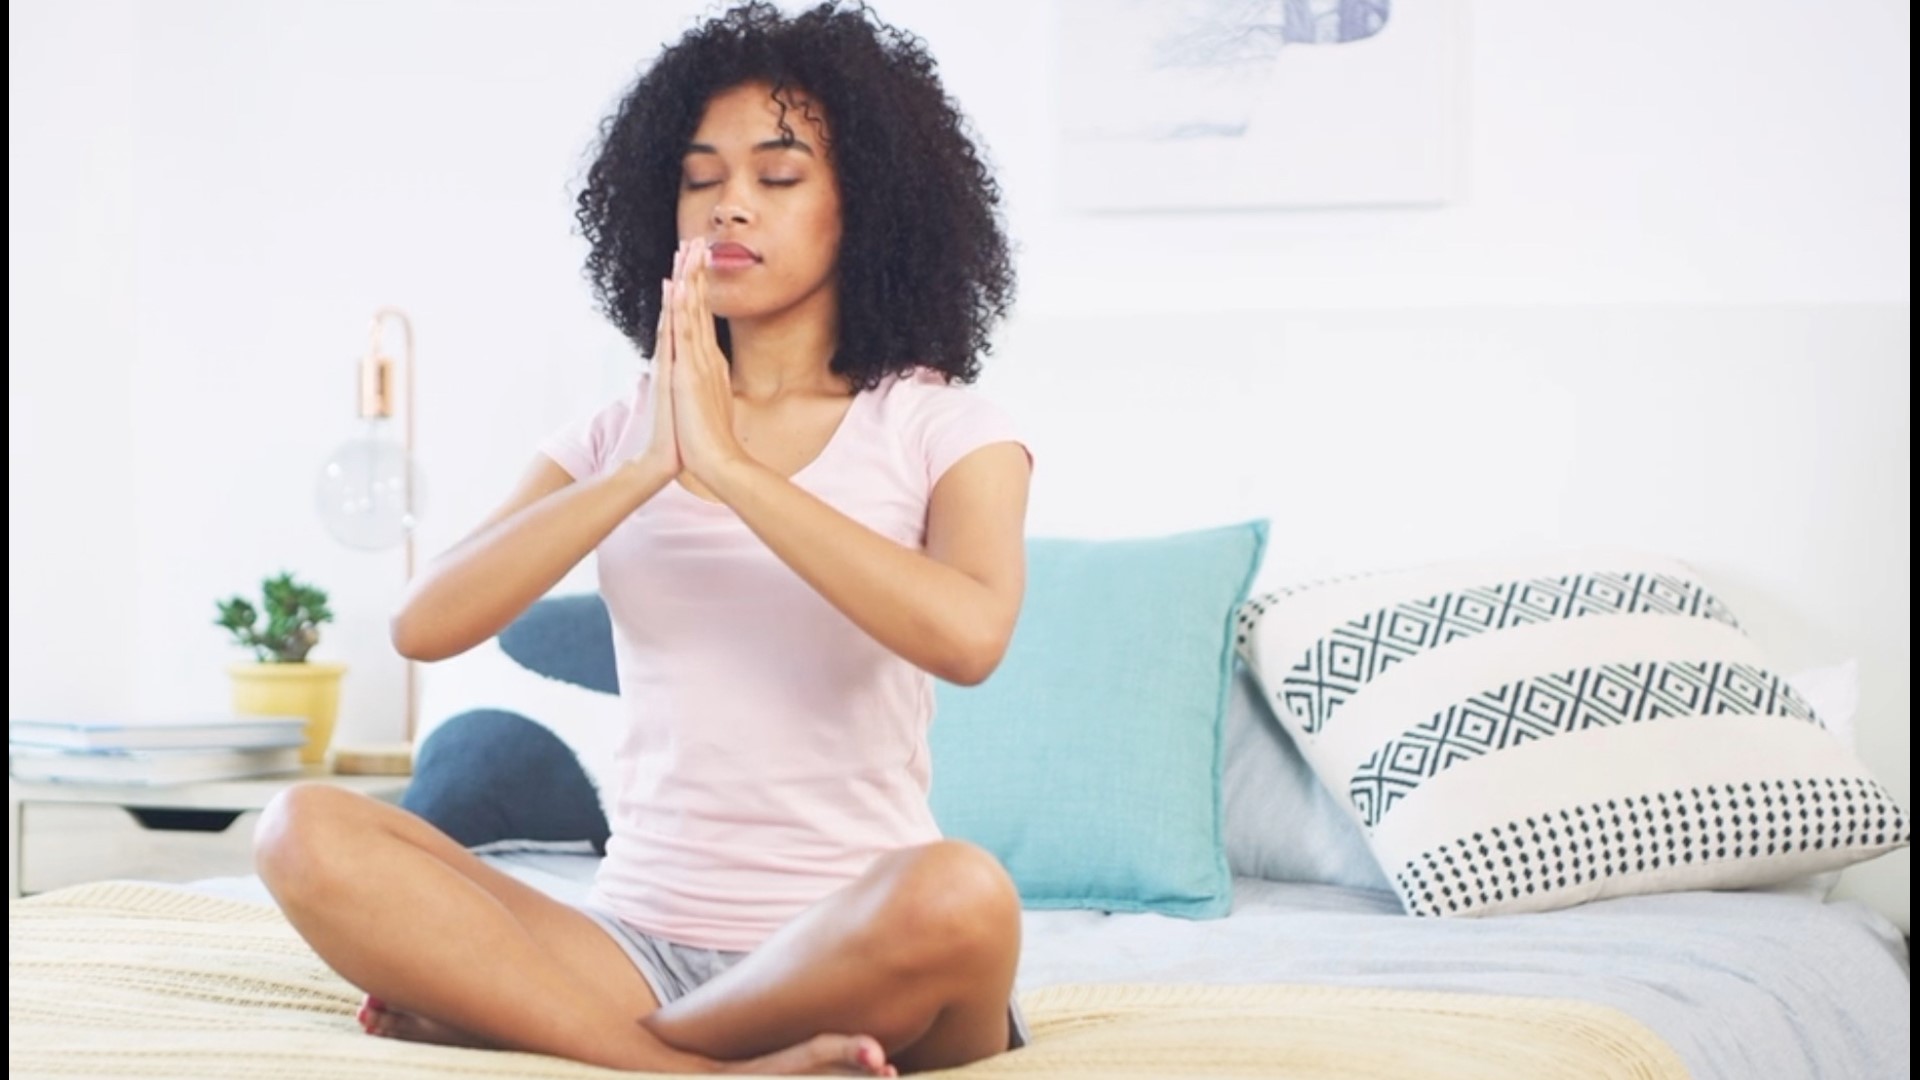 Mindfulness meditation has a long list of benefits that can reduce anxiety and stress. Buzz60's Chloe Hurst has the story!